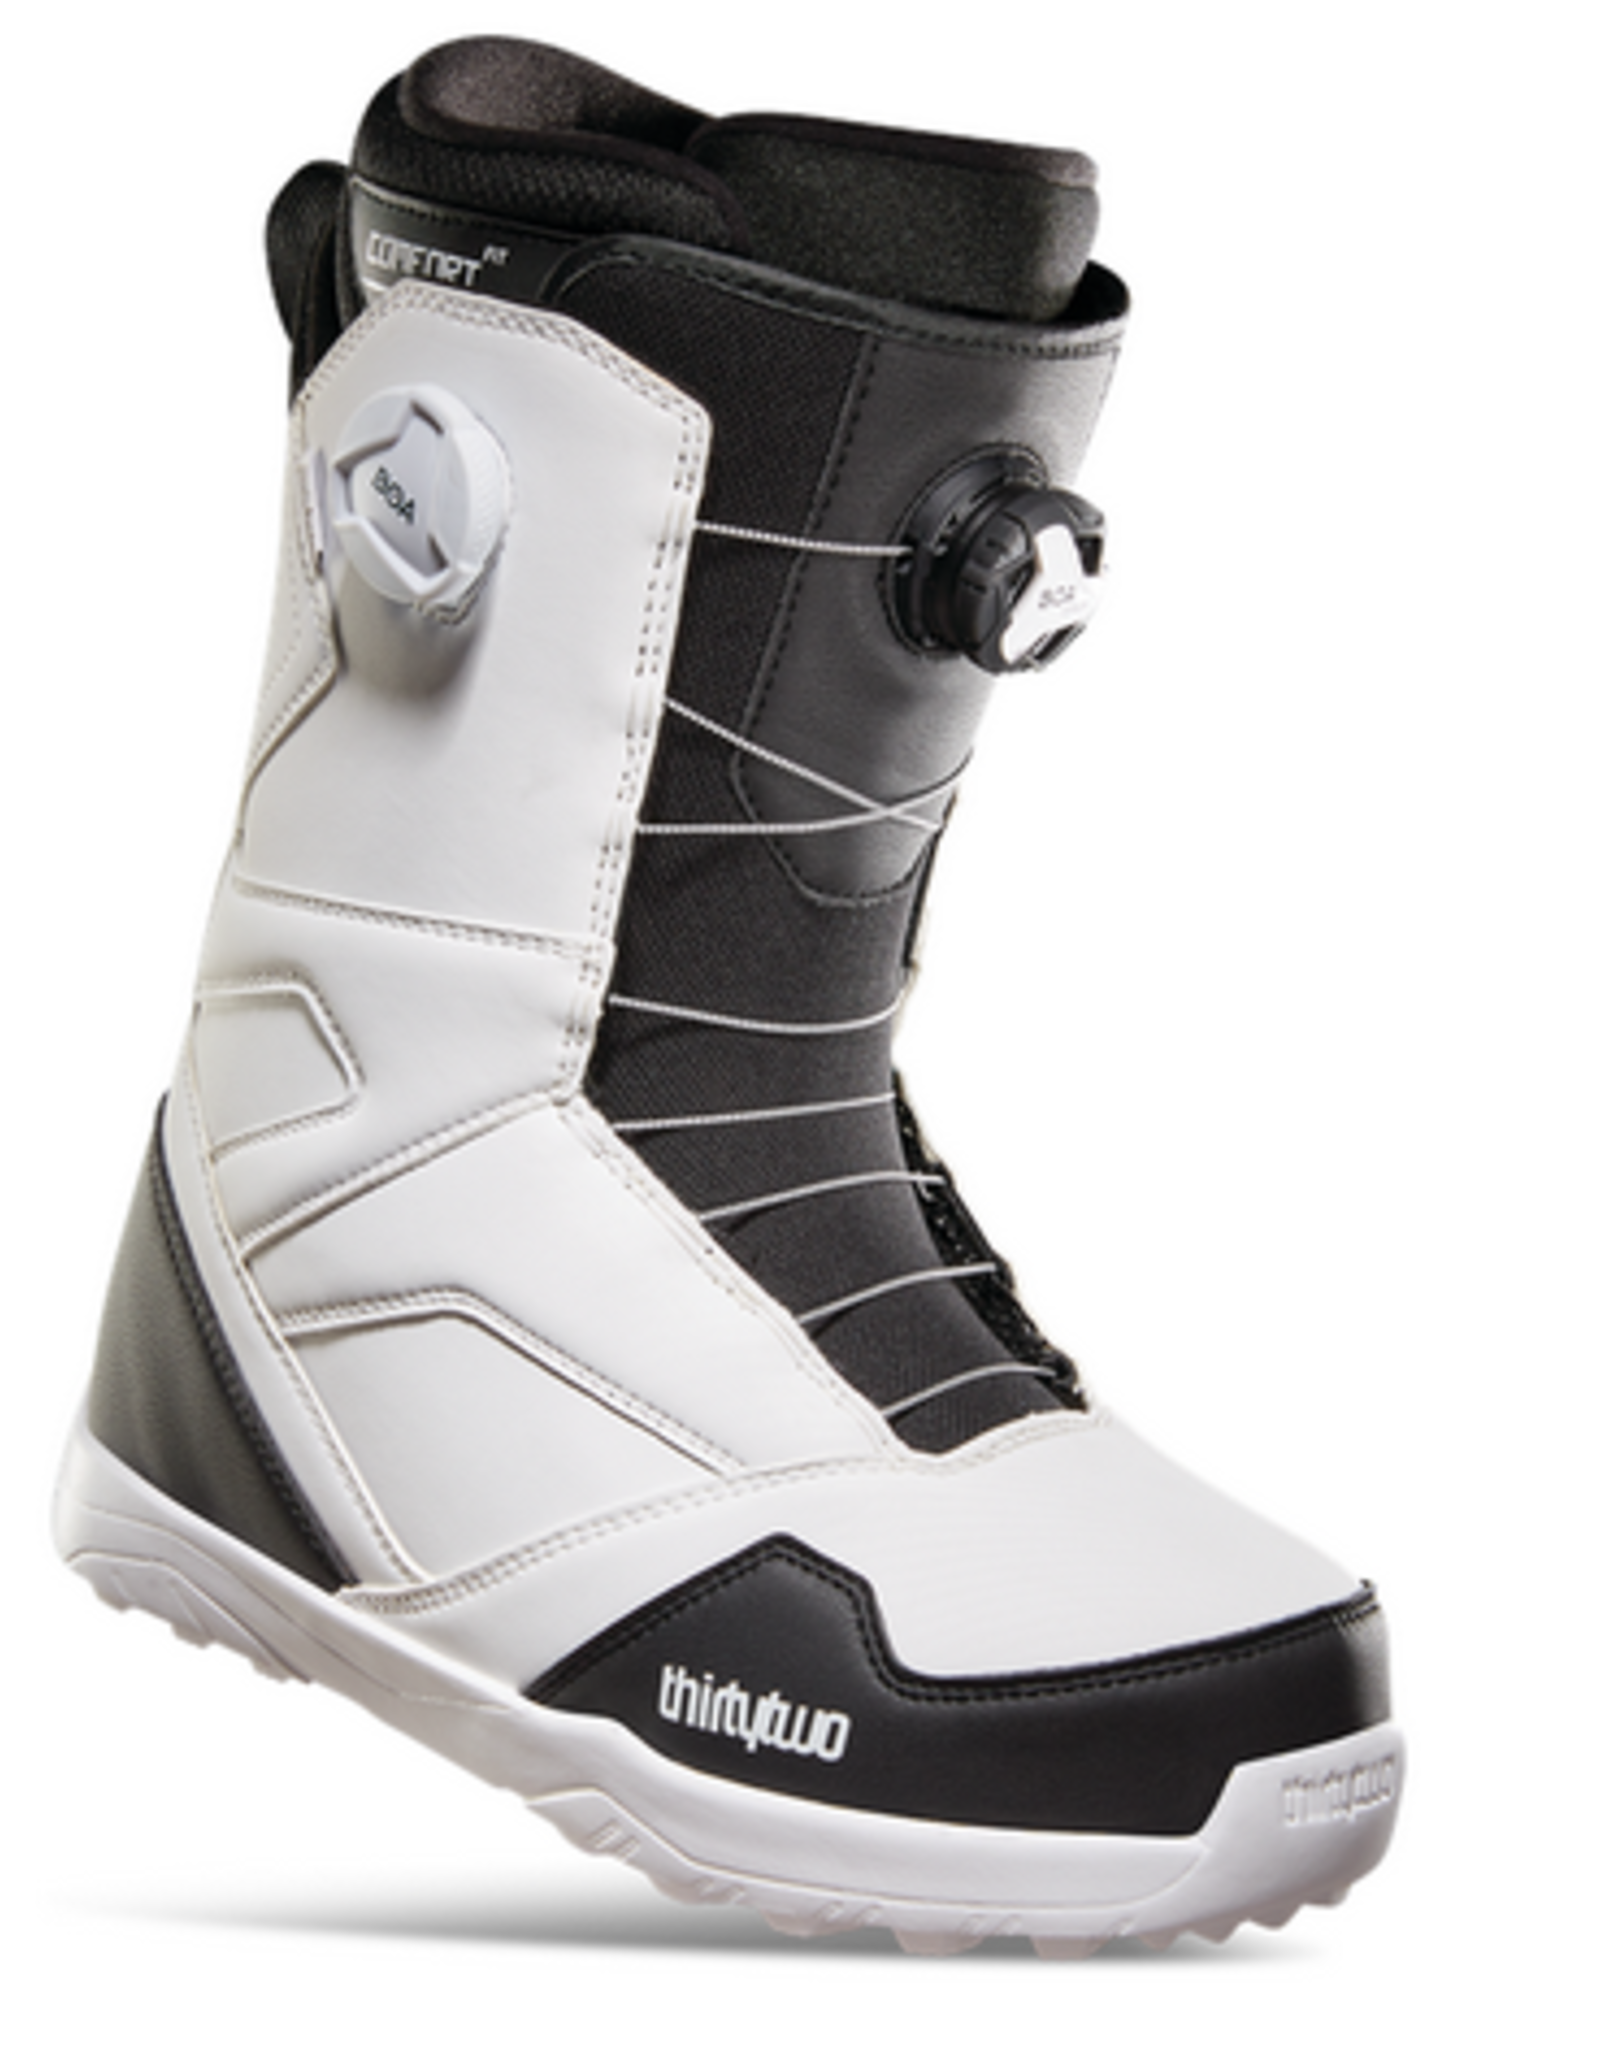 Afvigelse Akademi Specialitet 32 THIRTY TWO 2023 STW DOUBLE BOA SNOWBOARD BOOTS - The Garden